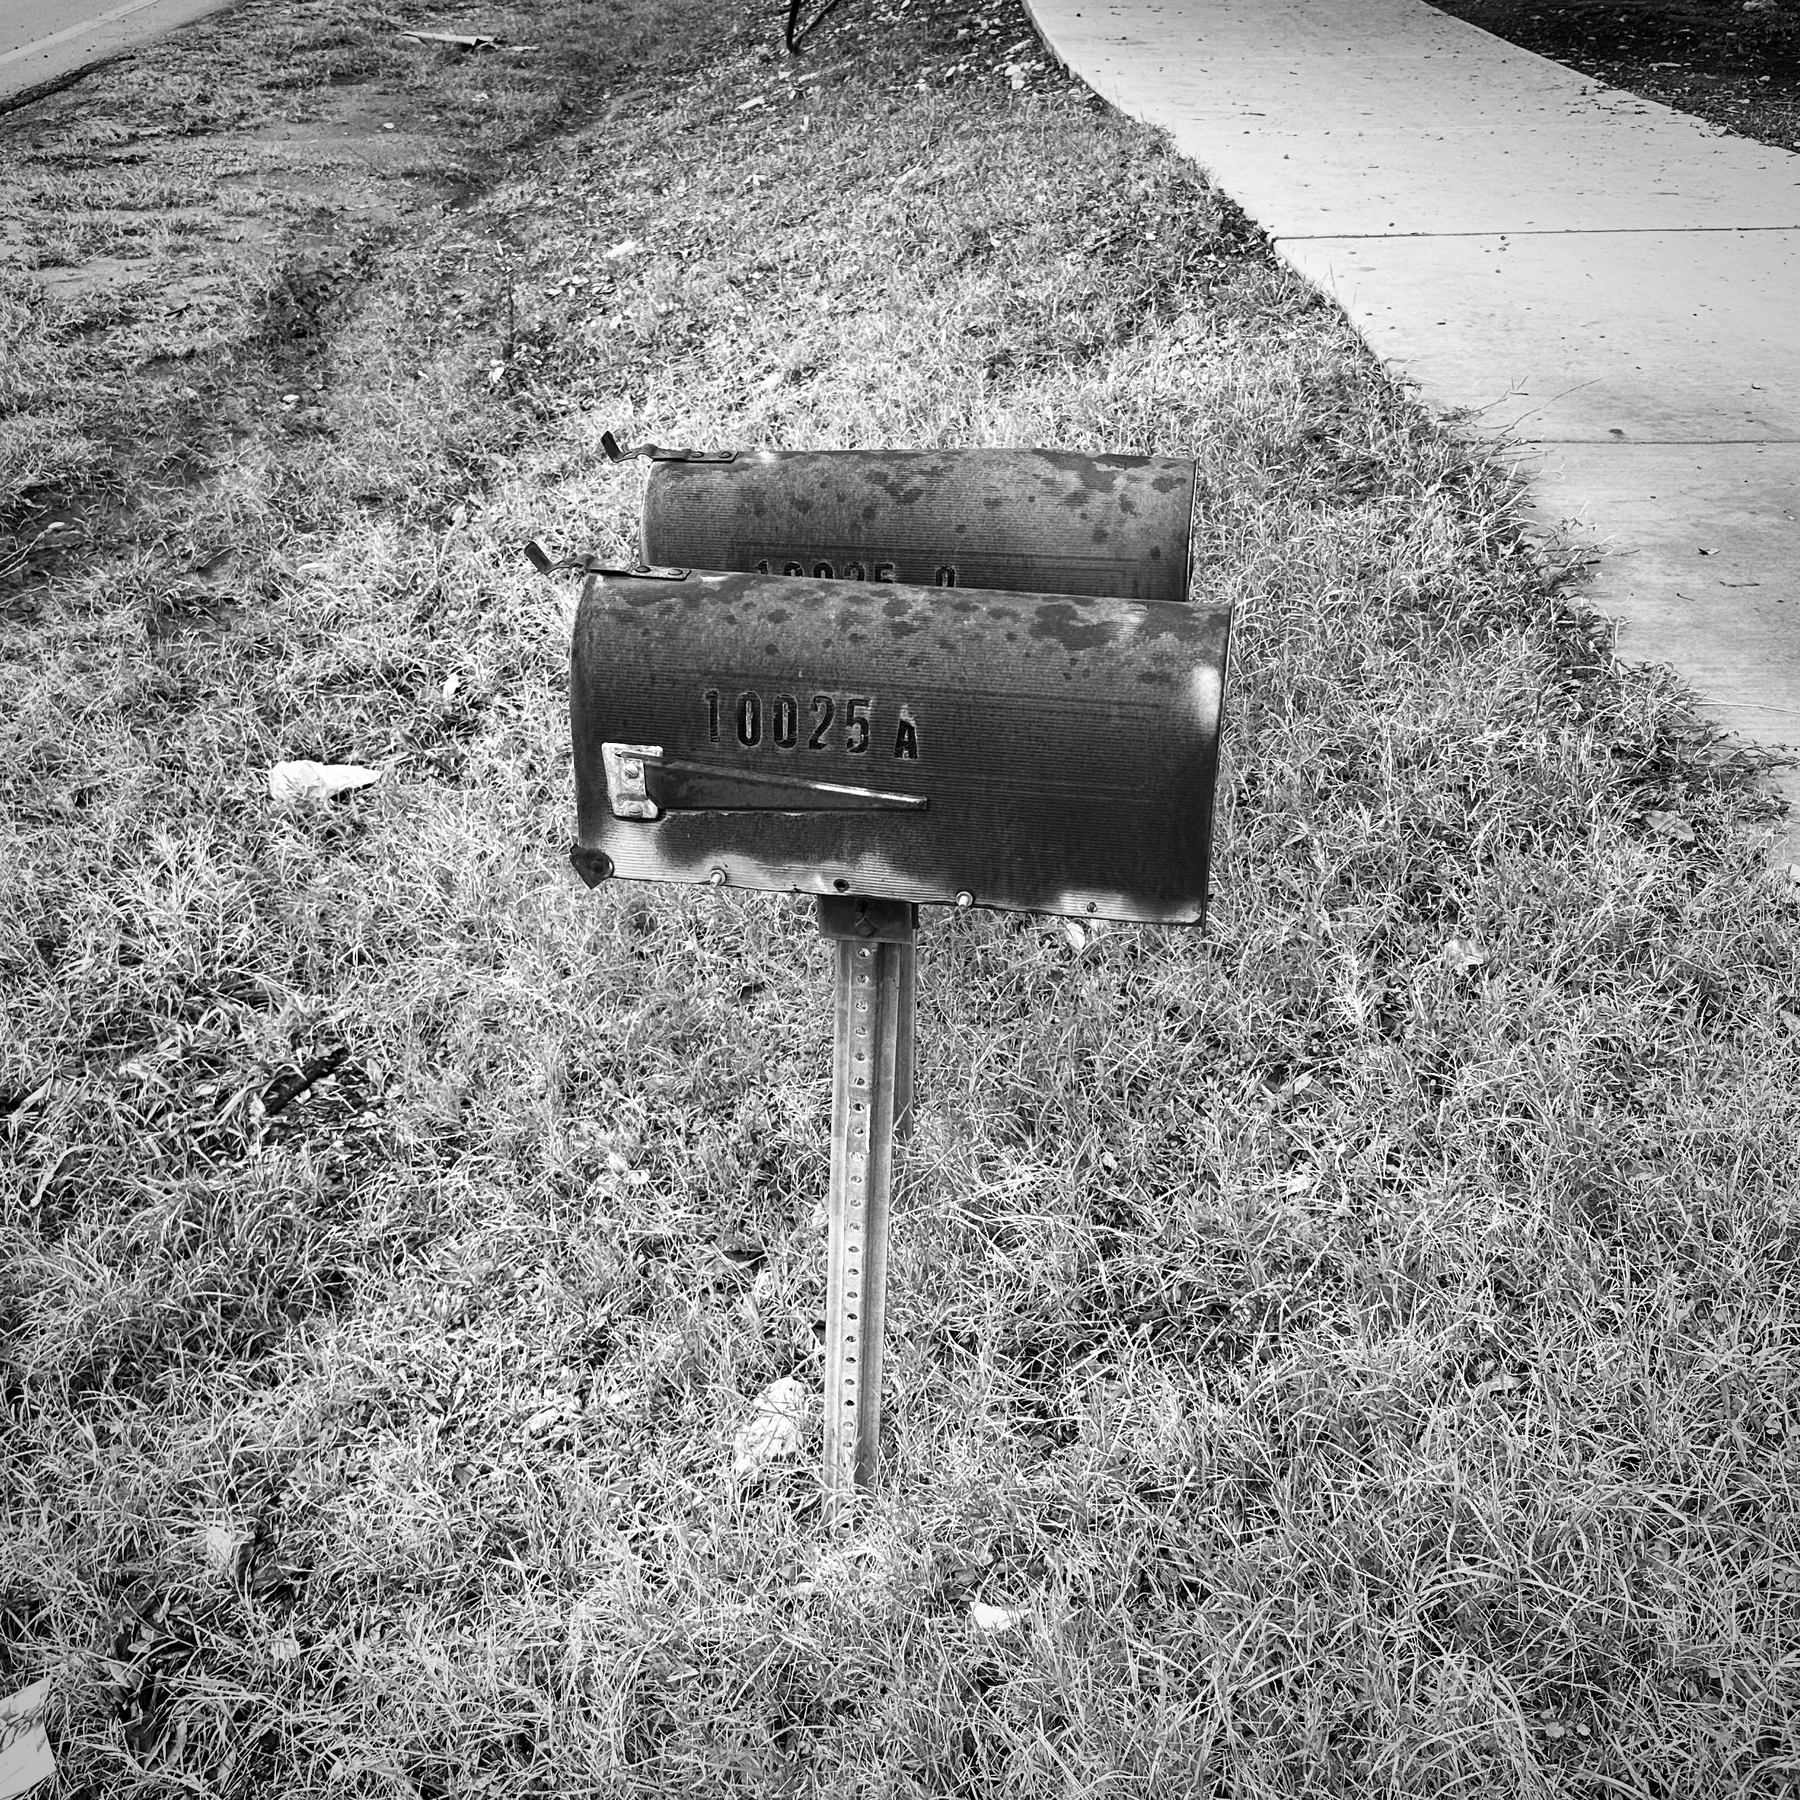 Old rusty mailboxes on the side of the road.